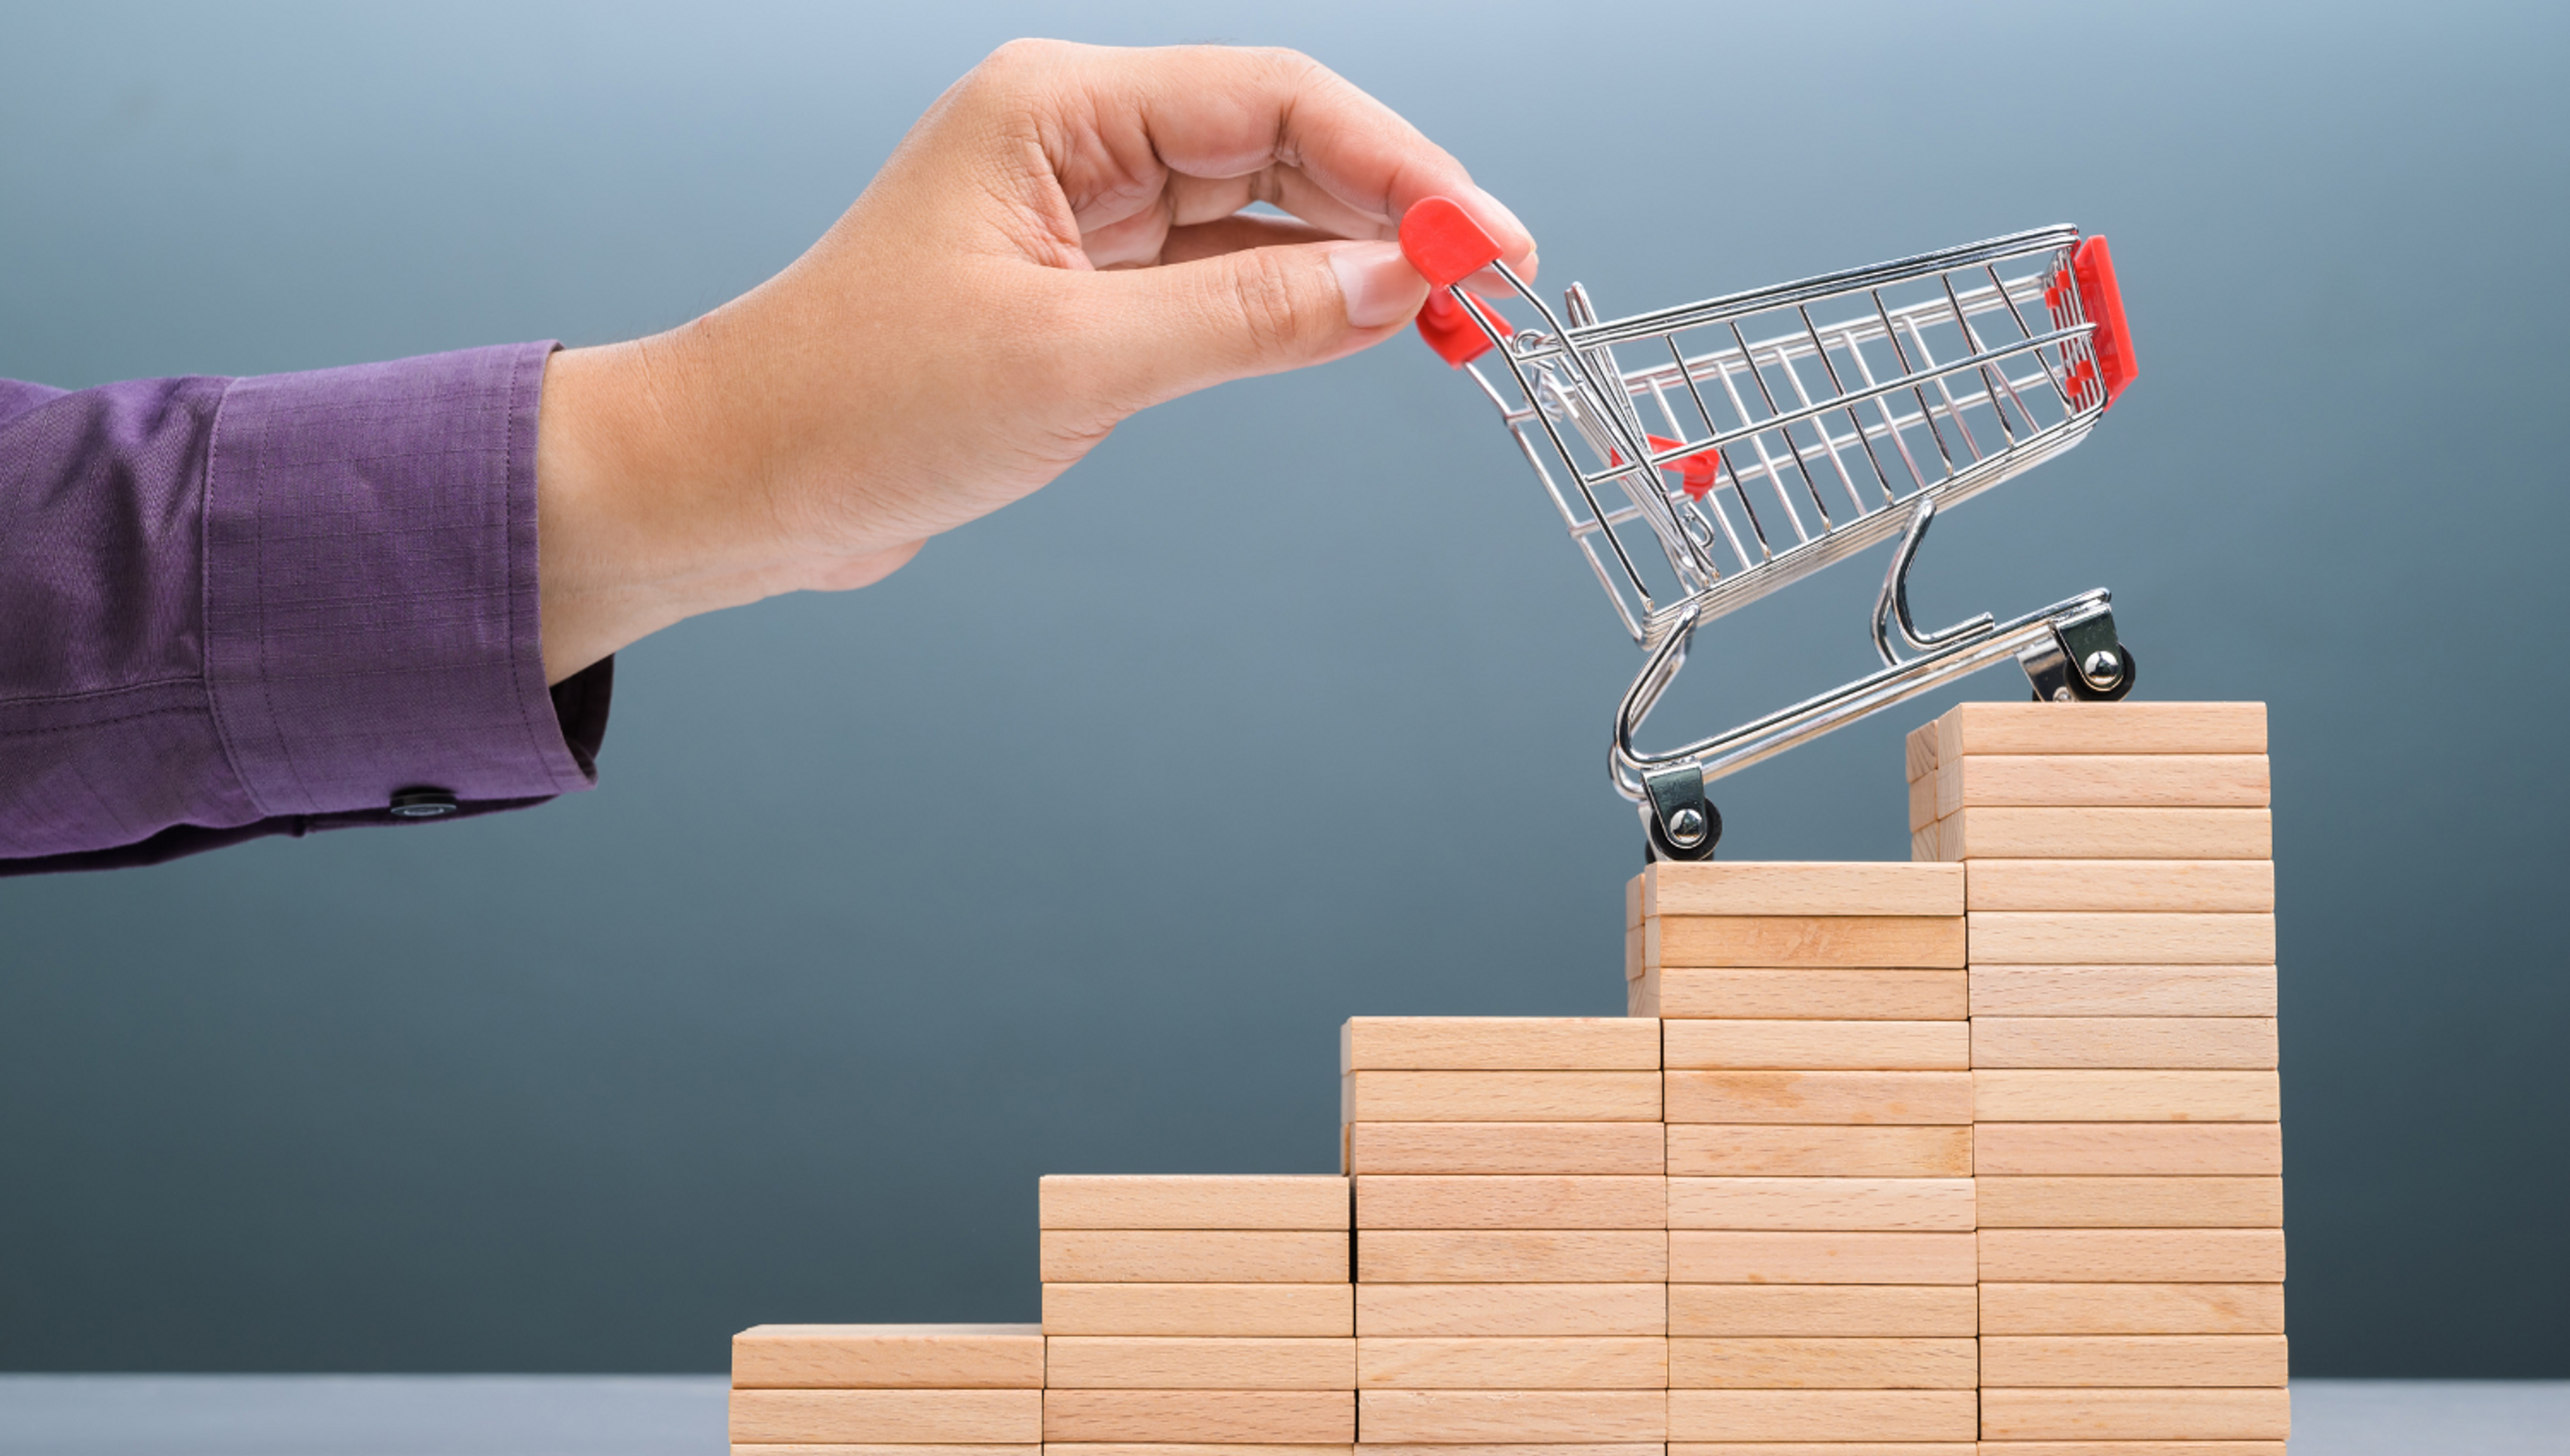 Automate And Increase E-commerce Sales With Our Solutions